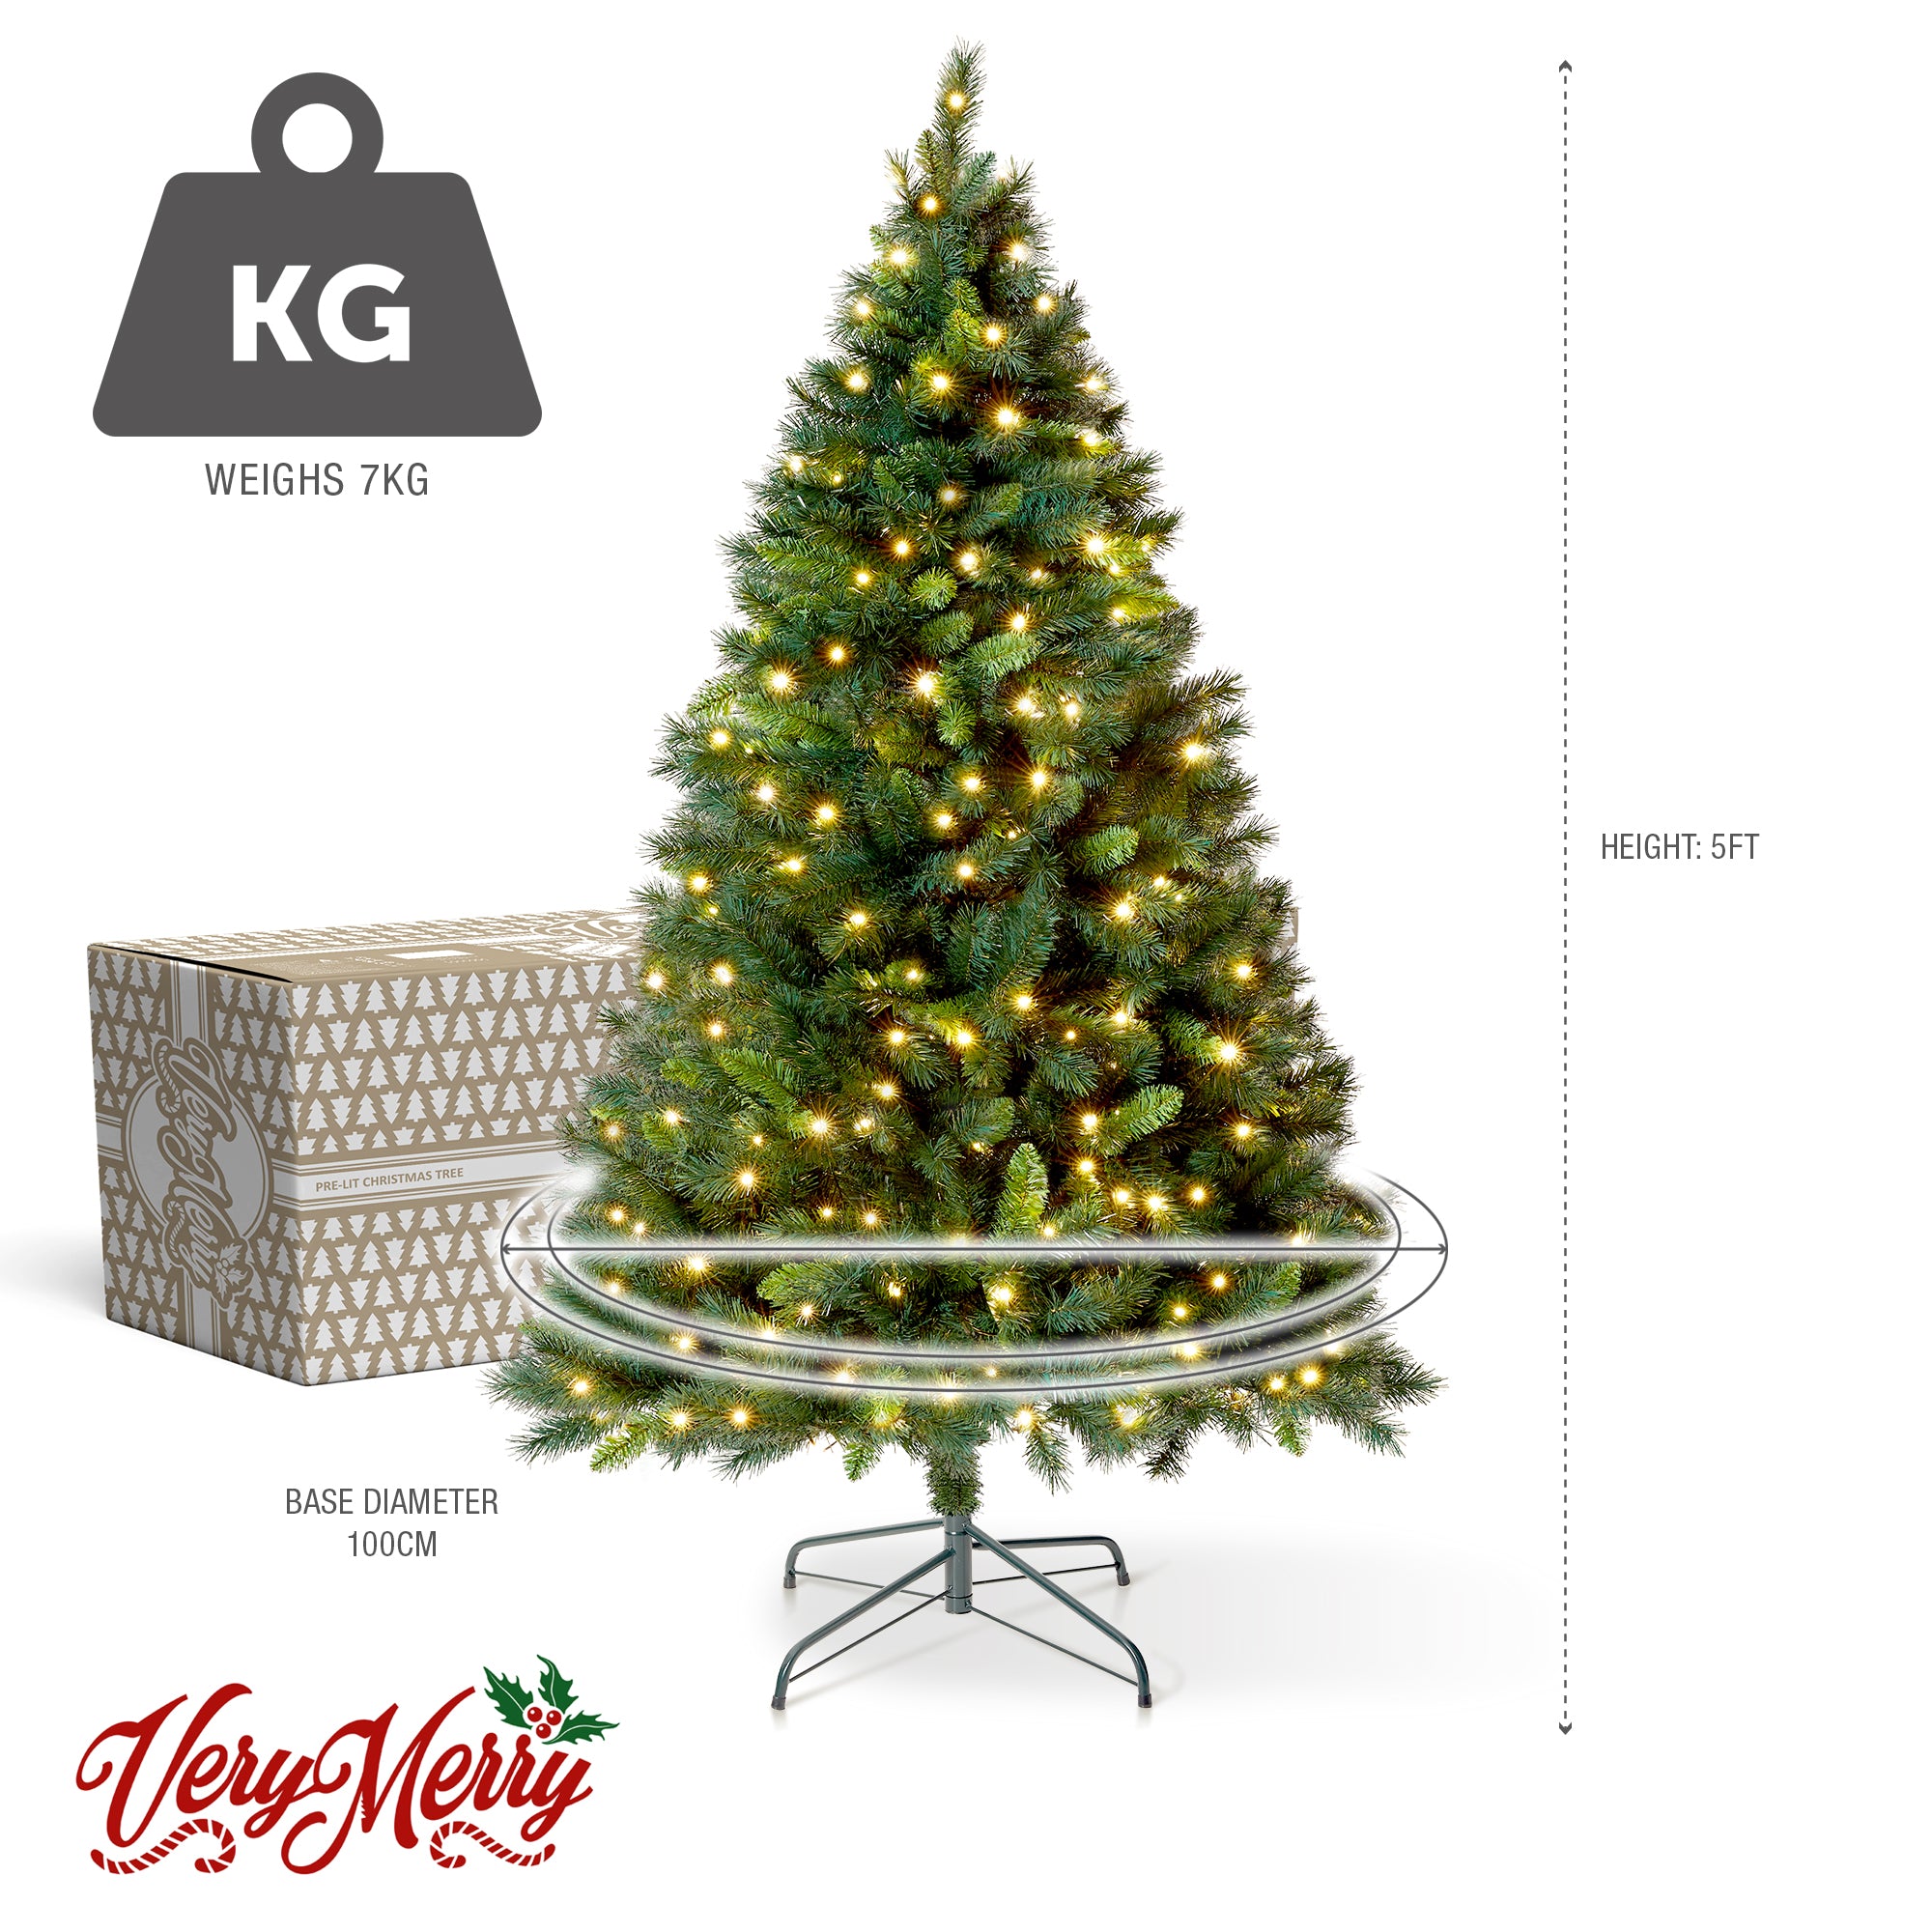 VeryMerry 5FT 'Snowhill' Pre Lit Christmas Tree with 200 Built-In Warm White LED Lights with Auto-Off Timer, 8 Lighting Modes and Foldable Metal Stand